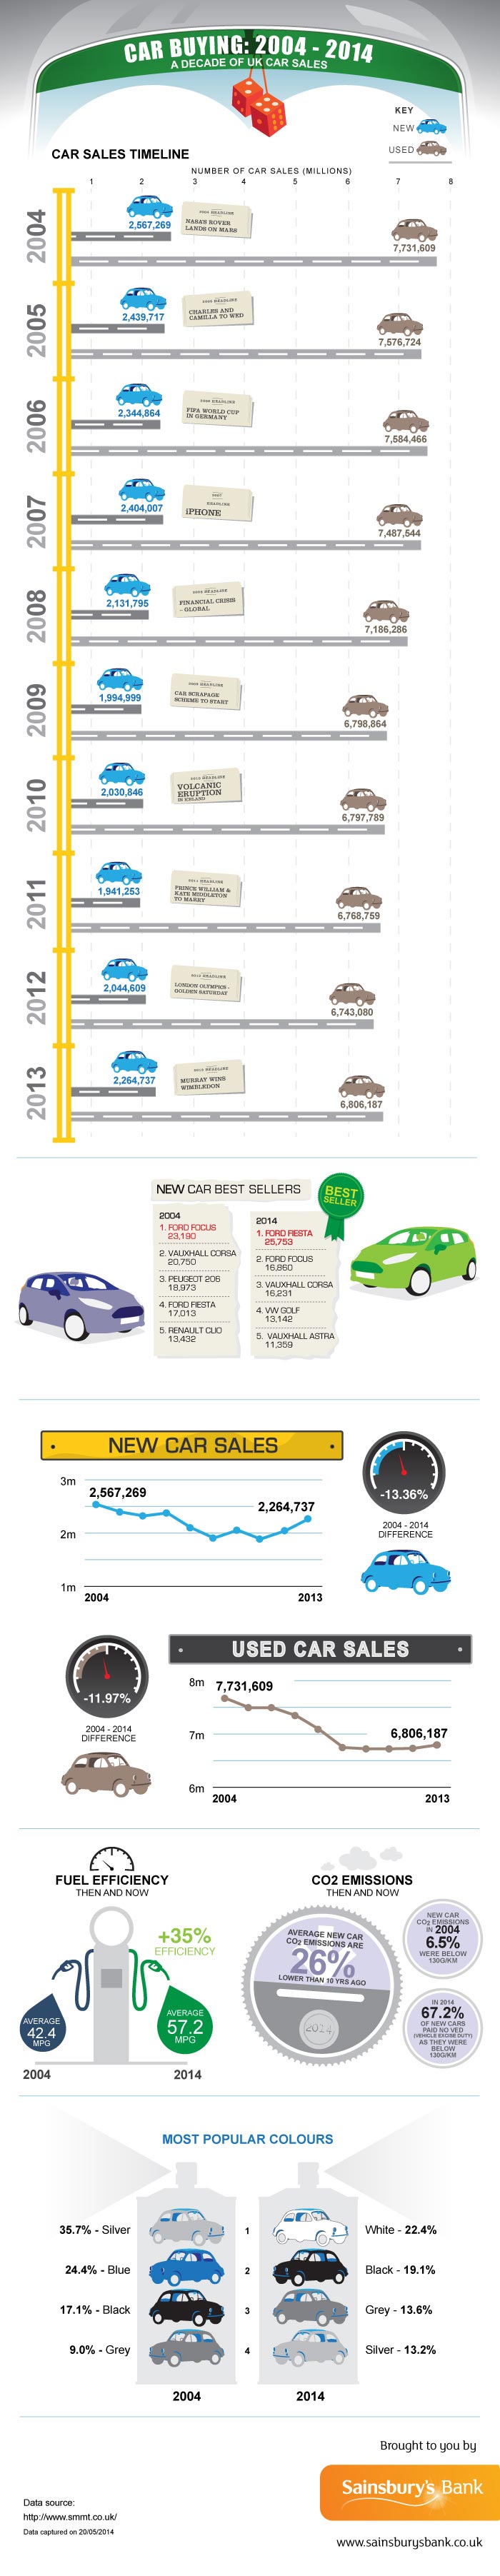 Car Buying Infographic